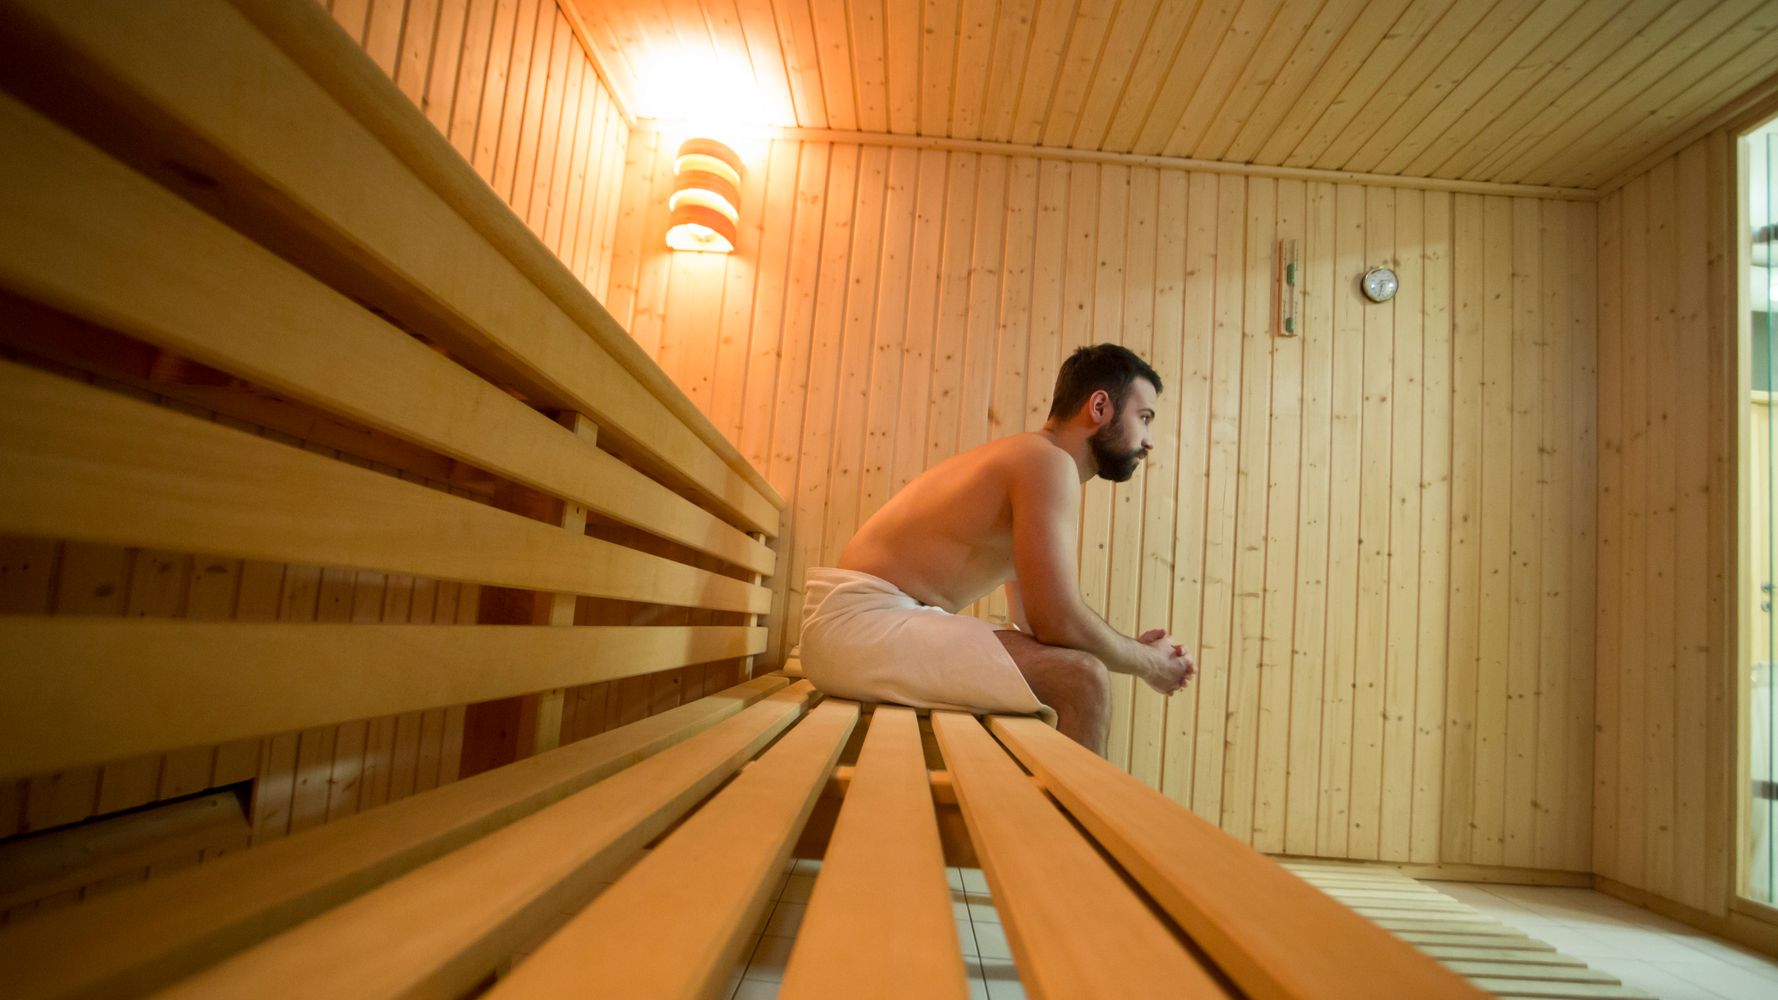 How Sanitary Are Steam Rooms And Saunas Anyway Huffpost Uk Wellness